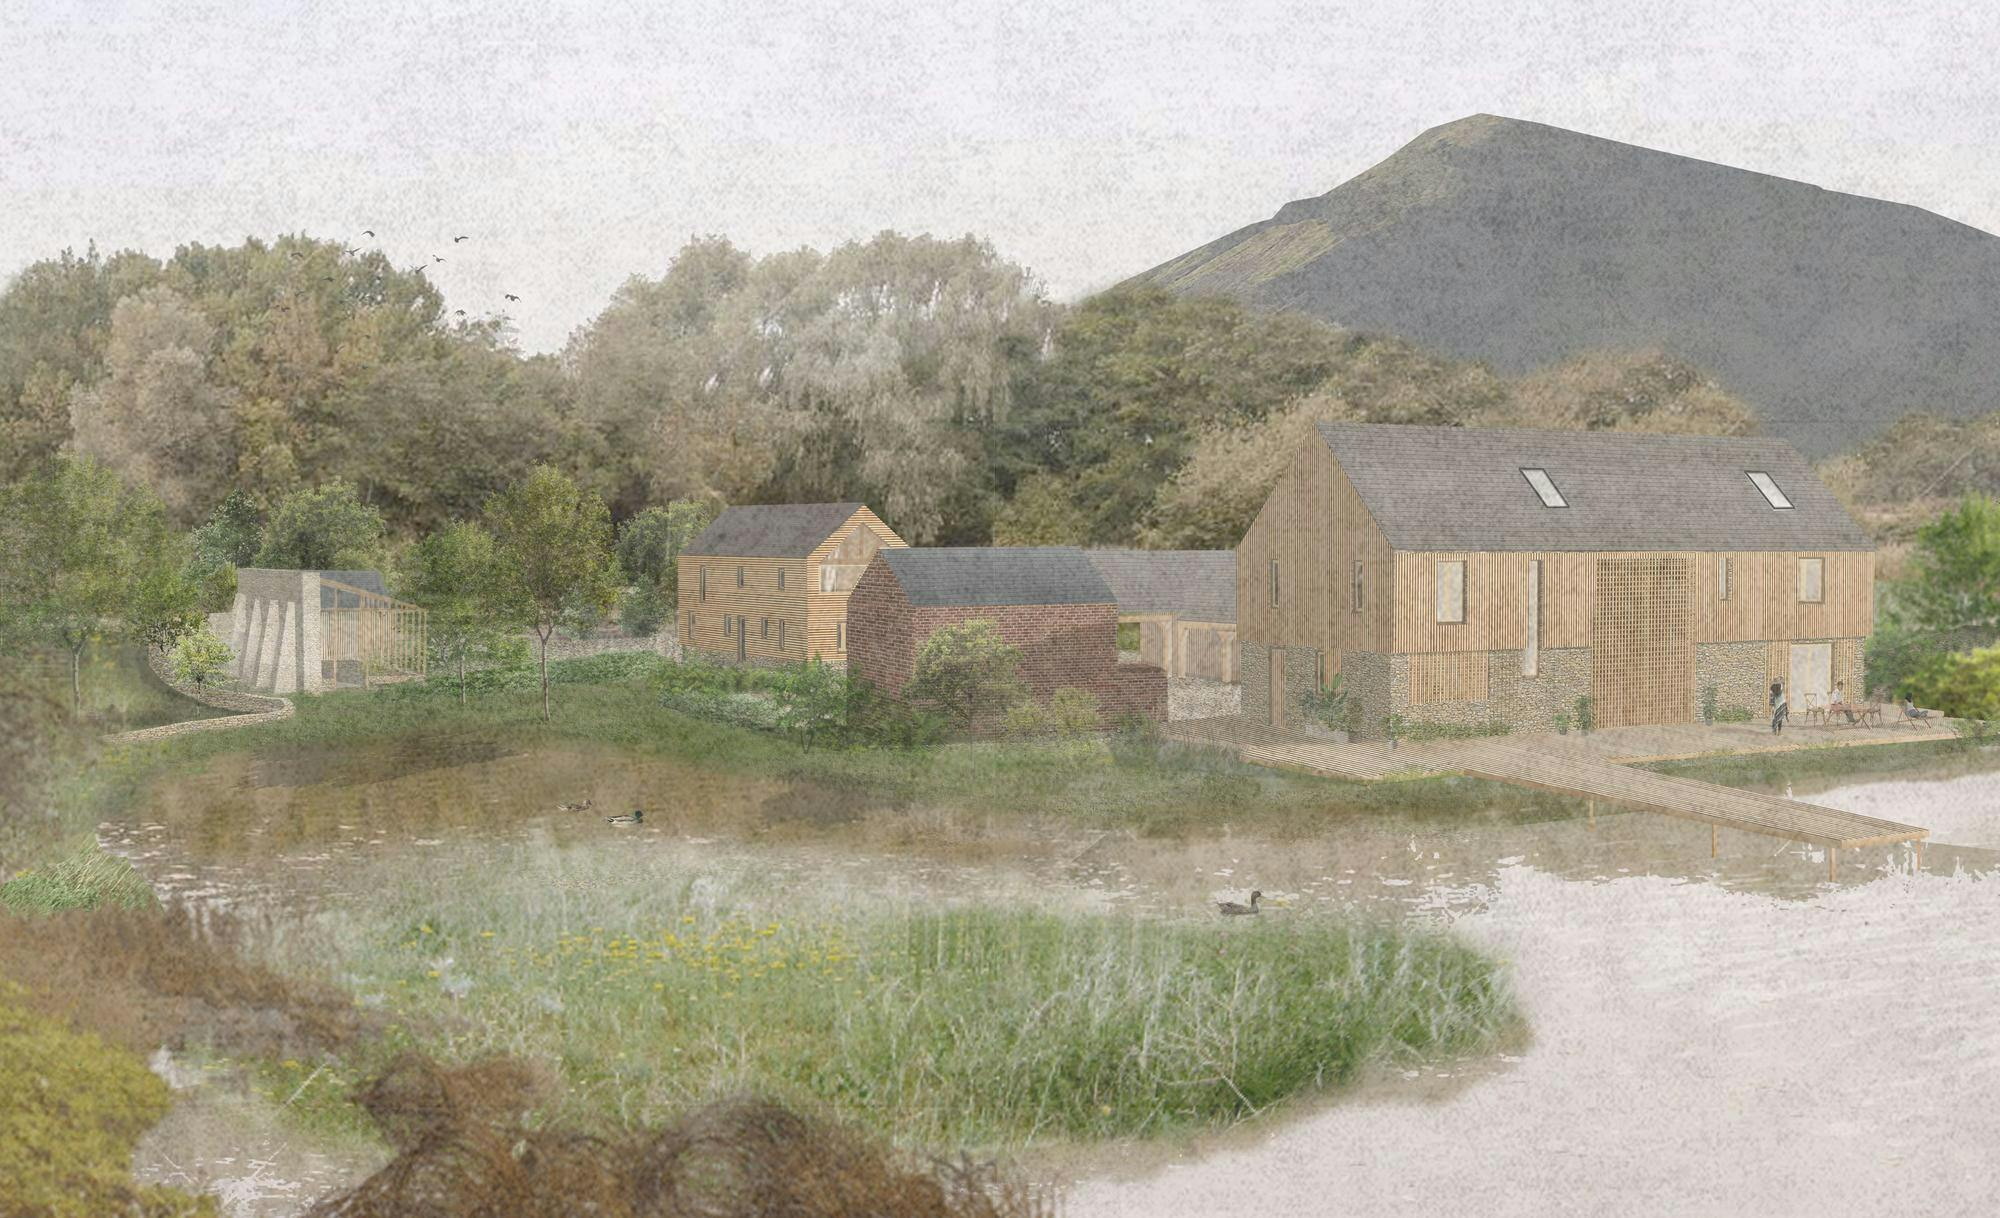 Architectural visualisation of whole scheme within the Shropshire Farm